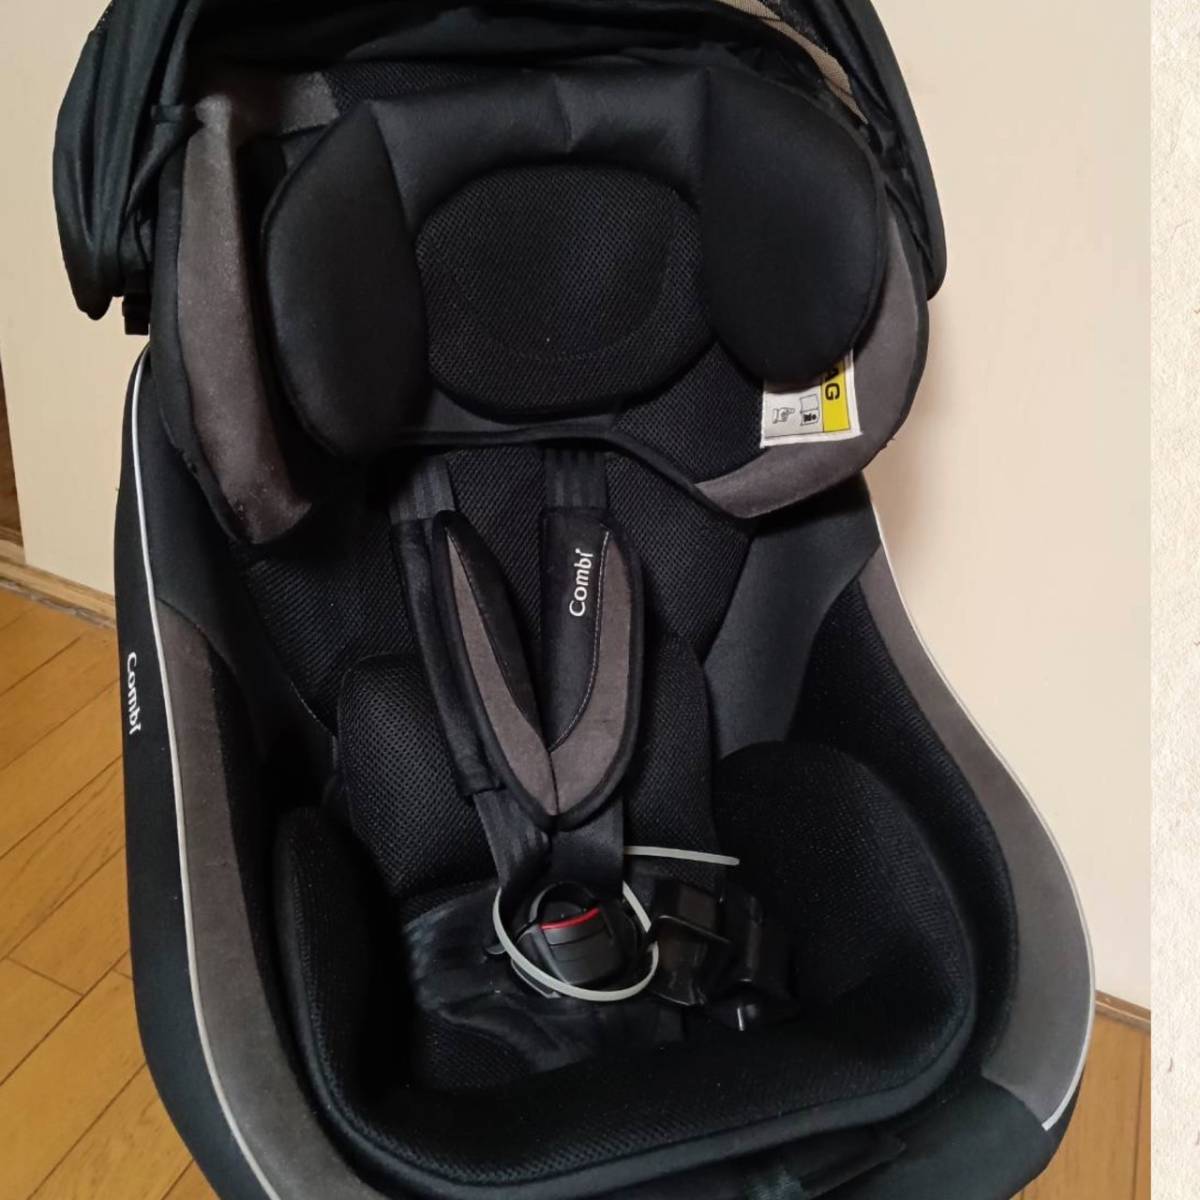  beautiful goods * combination * ISOFIX child seat newborn baby ~4 -years old about till air bag correspondence BLACK *Combi * car supplies present condition goods 